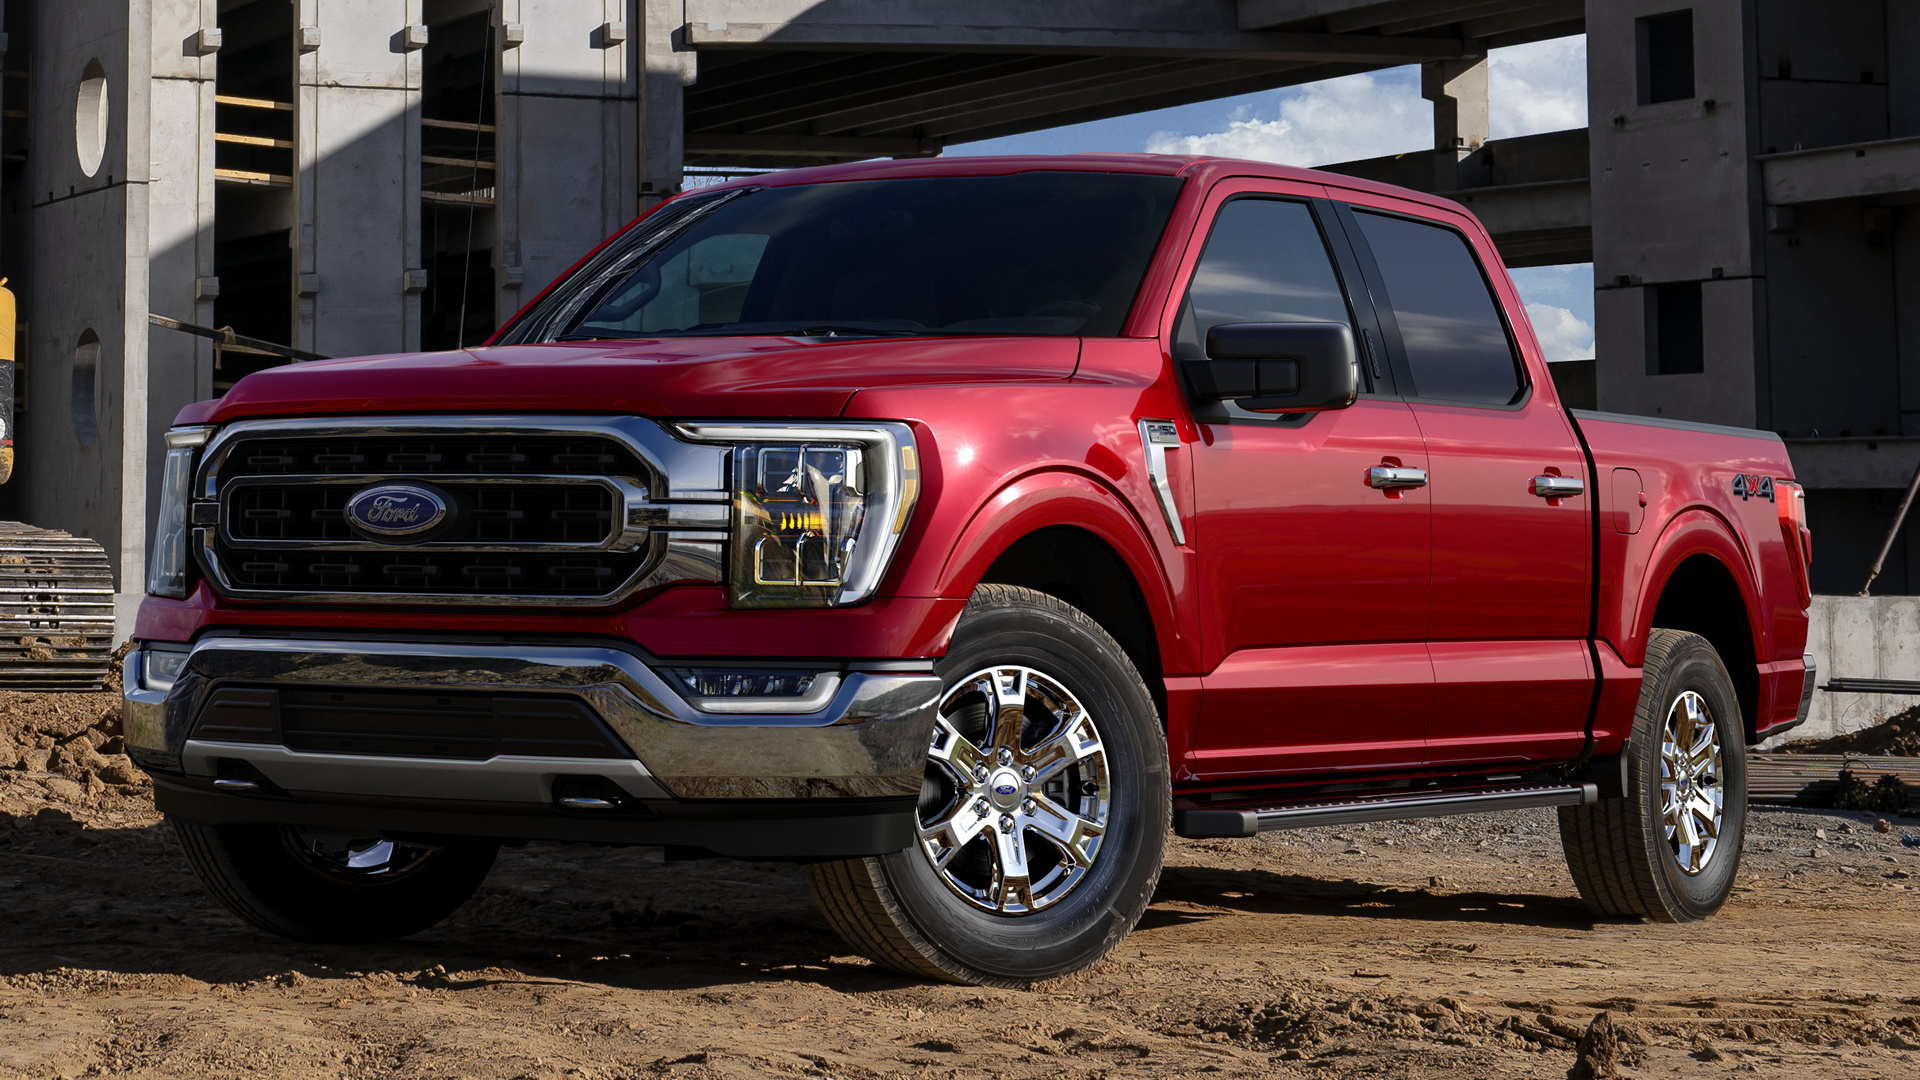 Free Download 2021 Ford F 150 Xlt Supercrew Wallpapers And Hd Images Car Pixel 1920x1080 For Your Desktop Mobile Tablet Explore 45 Ford F 150 2021 Wallpapers Ford F 150